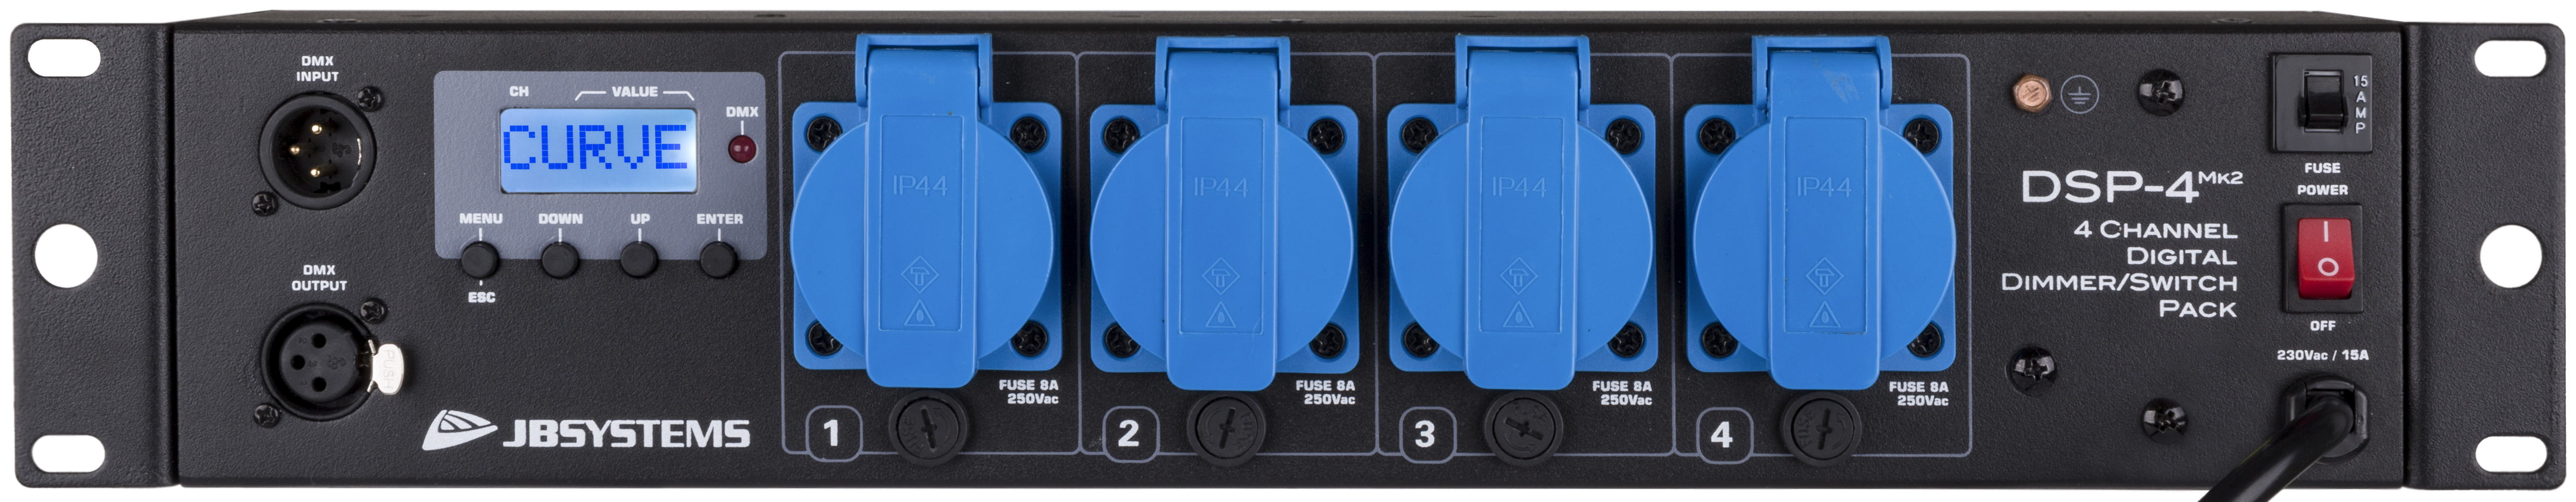 Multi functional dimmer/switch pack equipped with 4 mains sockets (German Schuko).